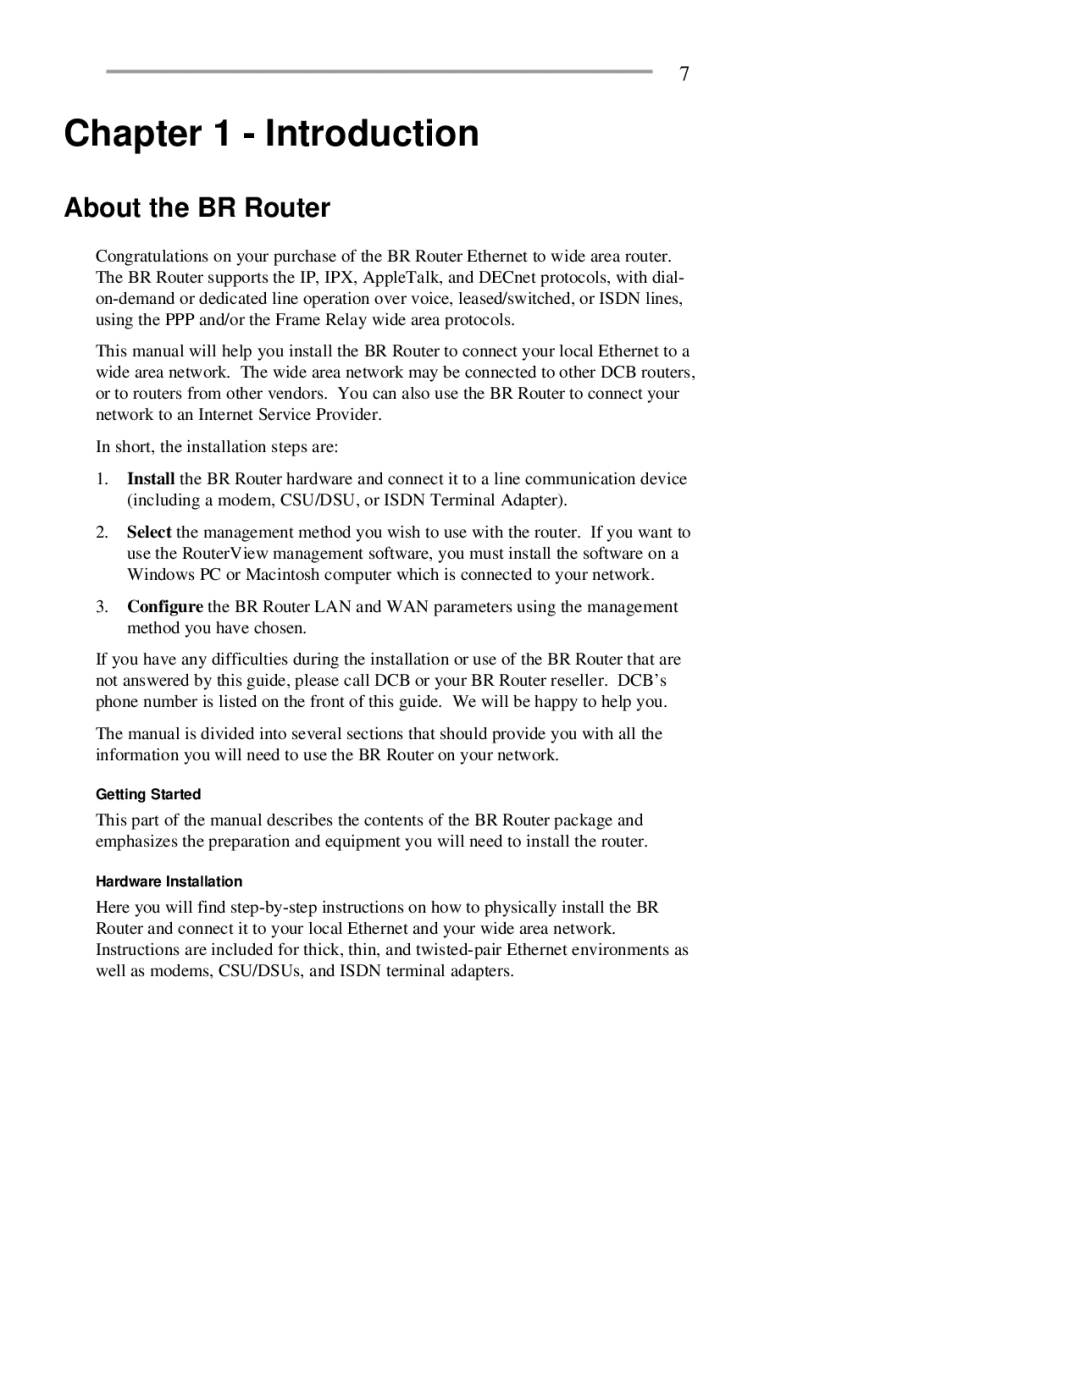 RAD Data comm BR-ASX01, BR-ASI01 manual Introduction, About the BR Router 